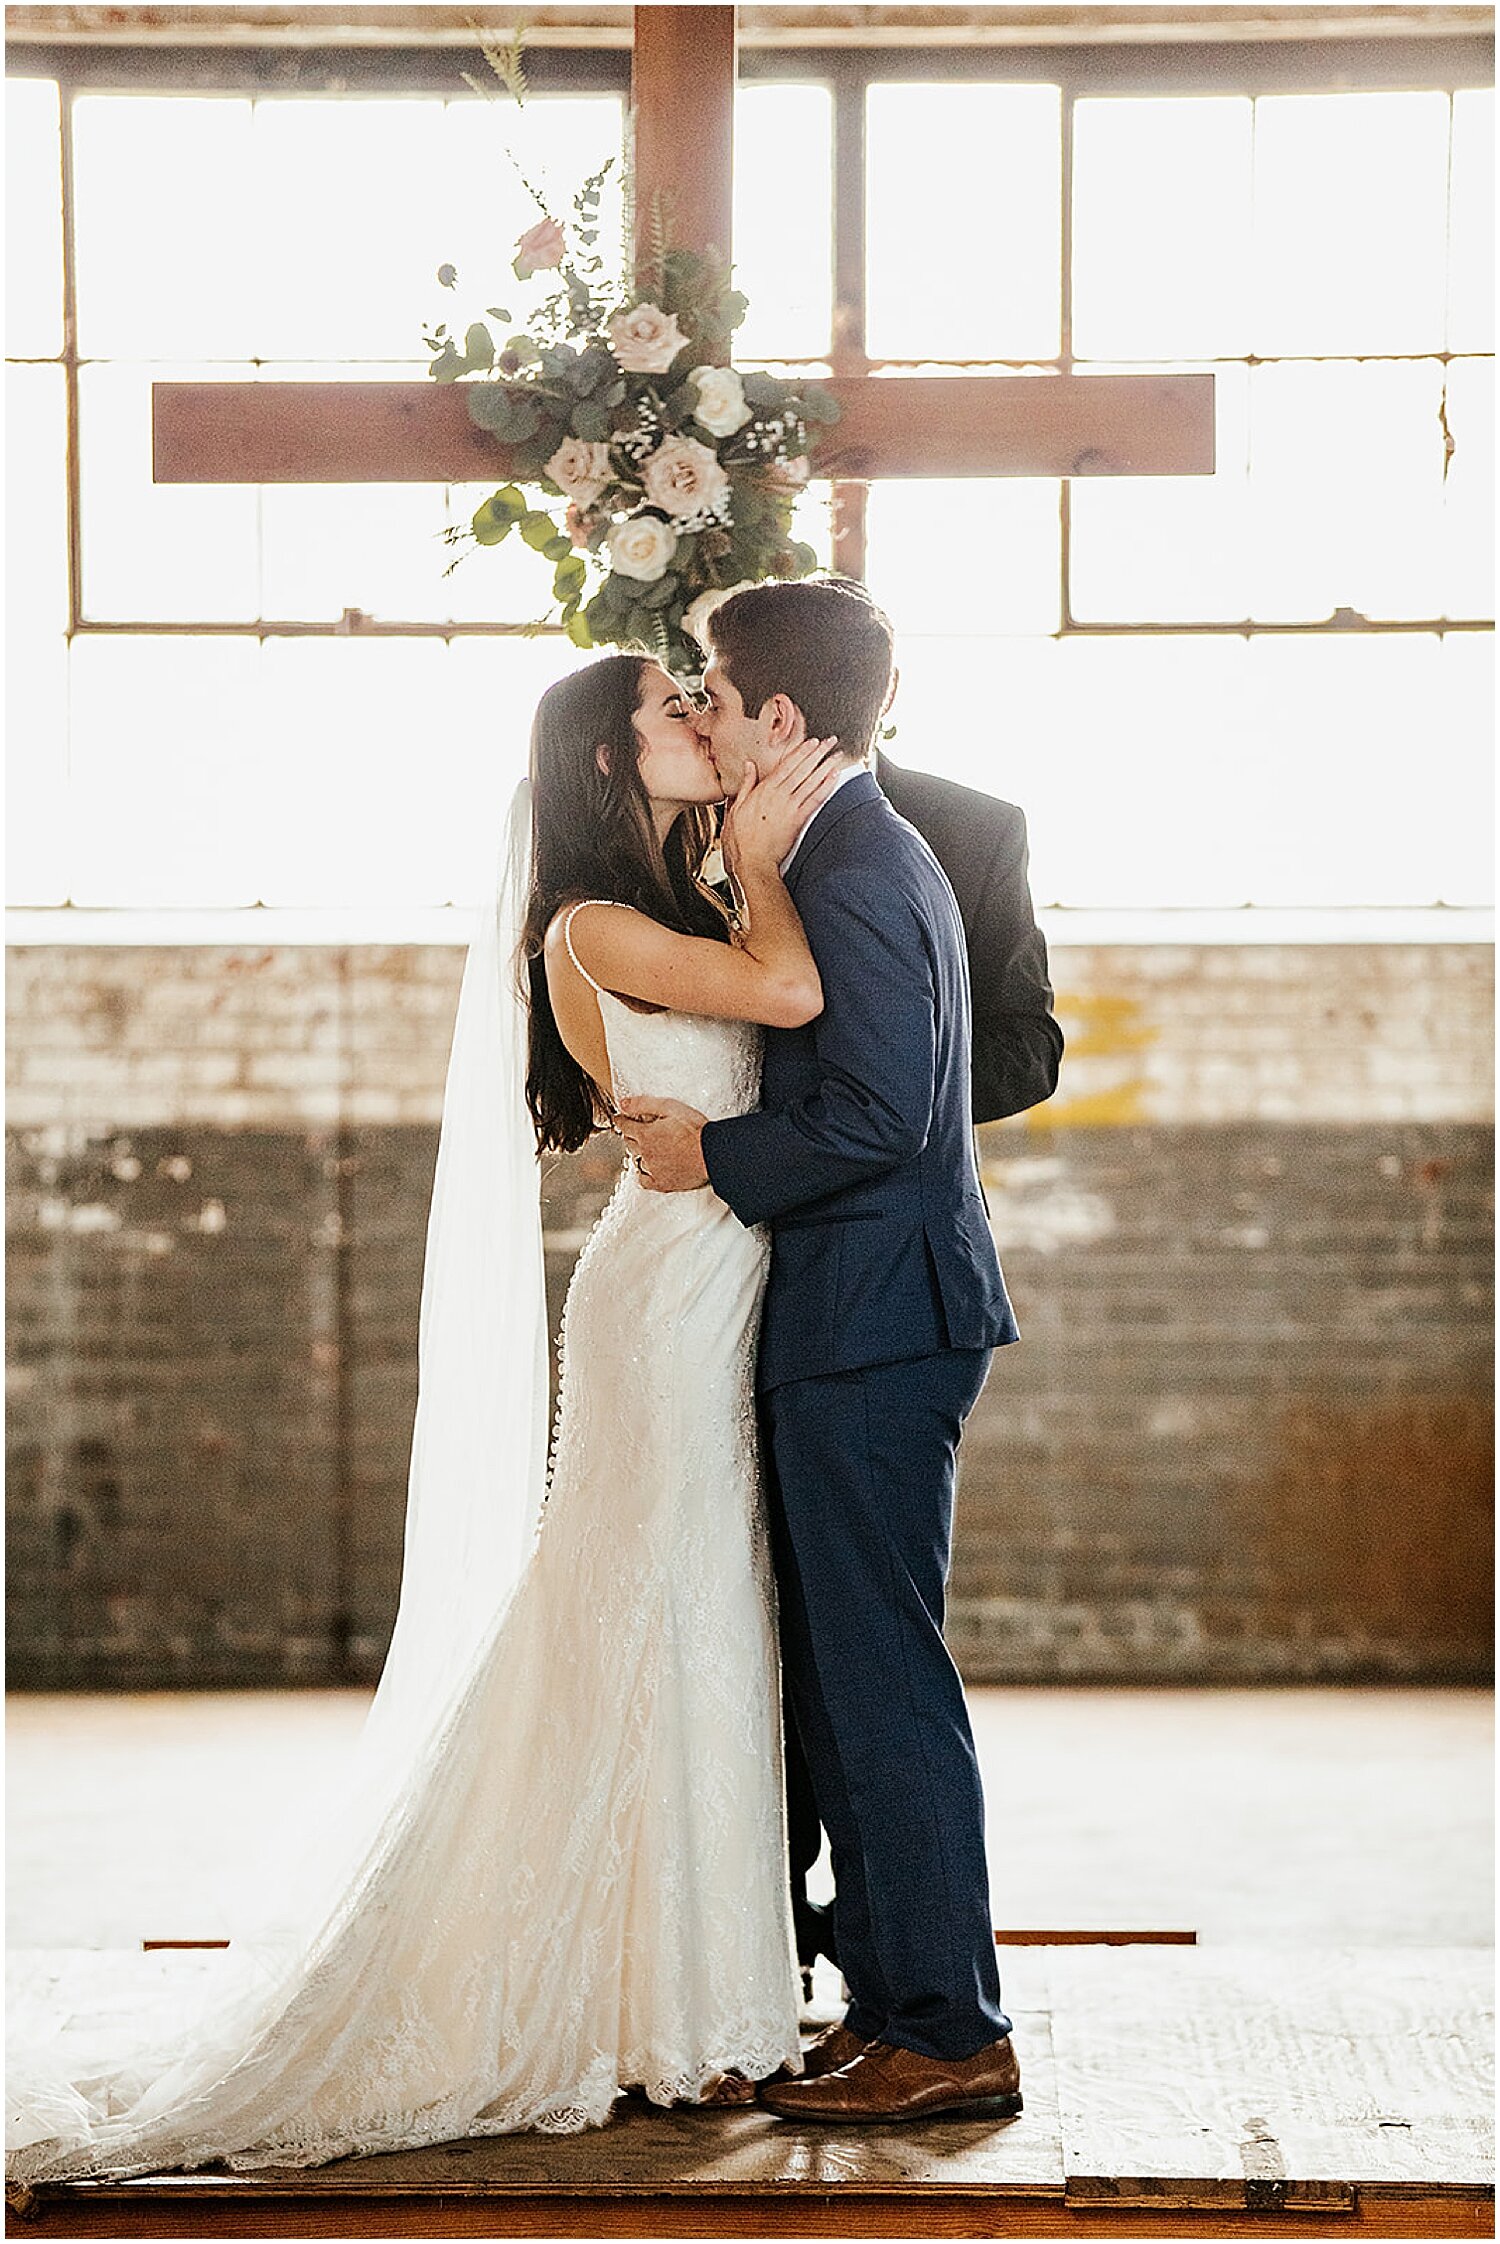  bride and groom kiss at their wedding ceremony 